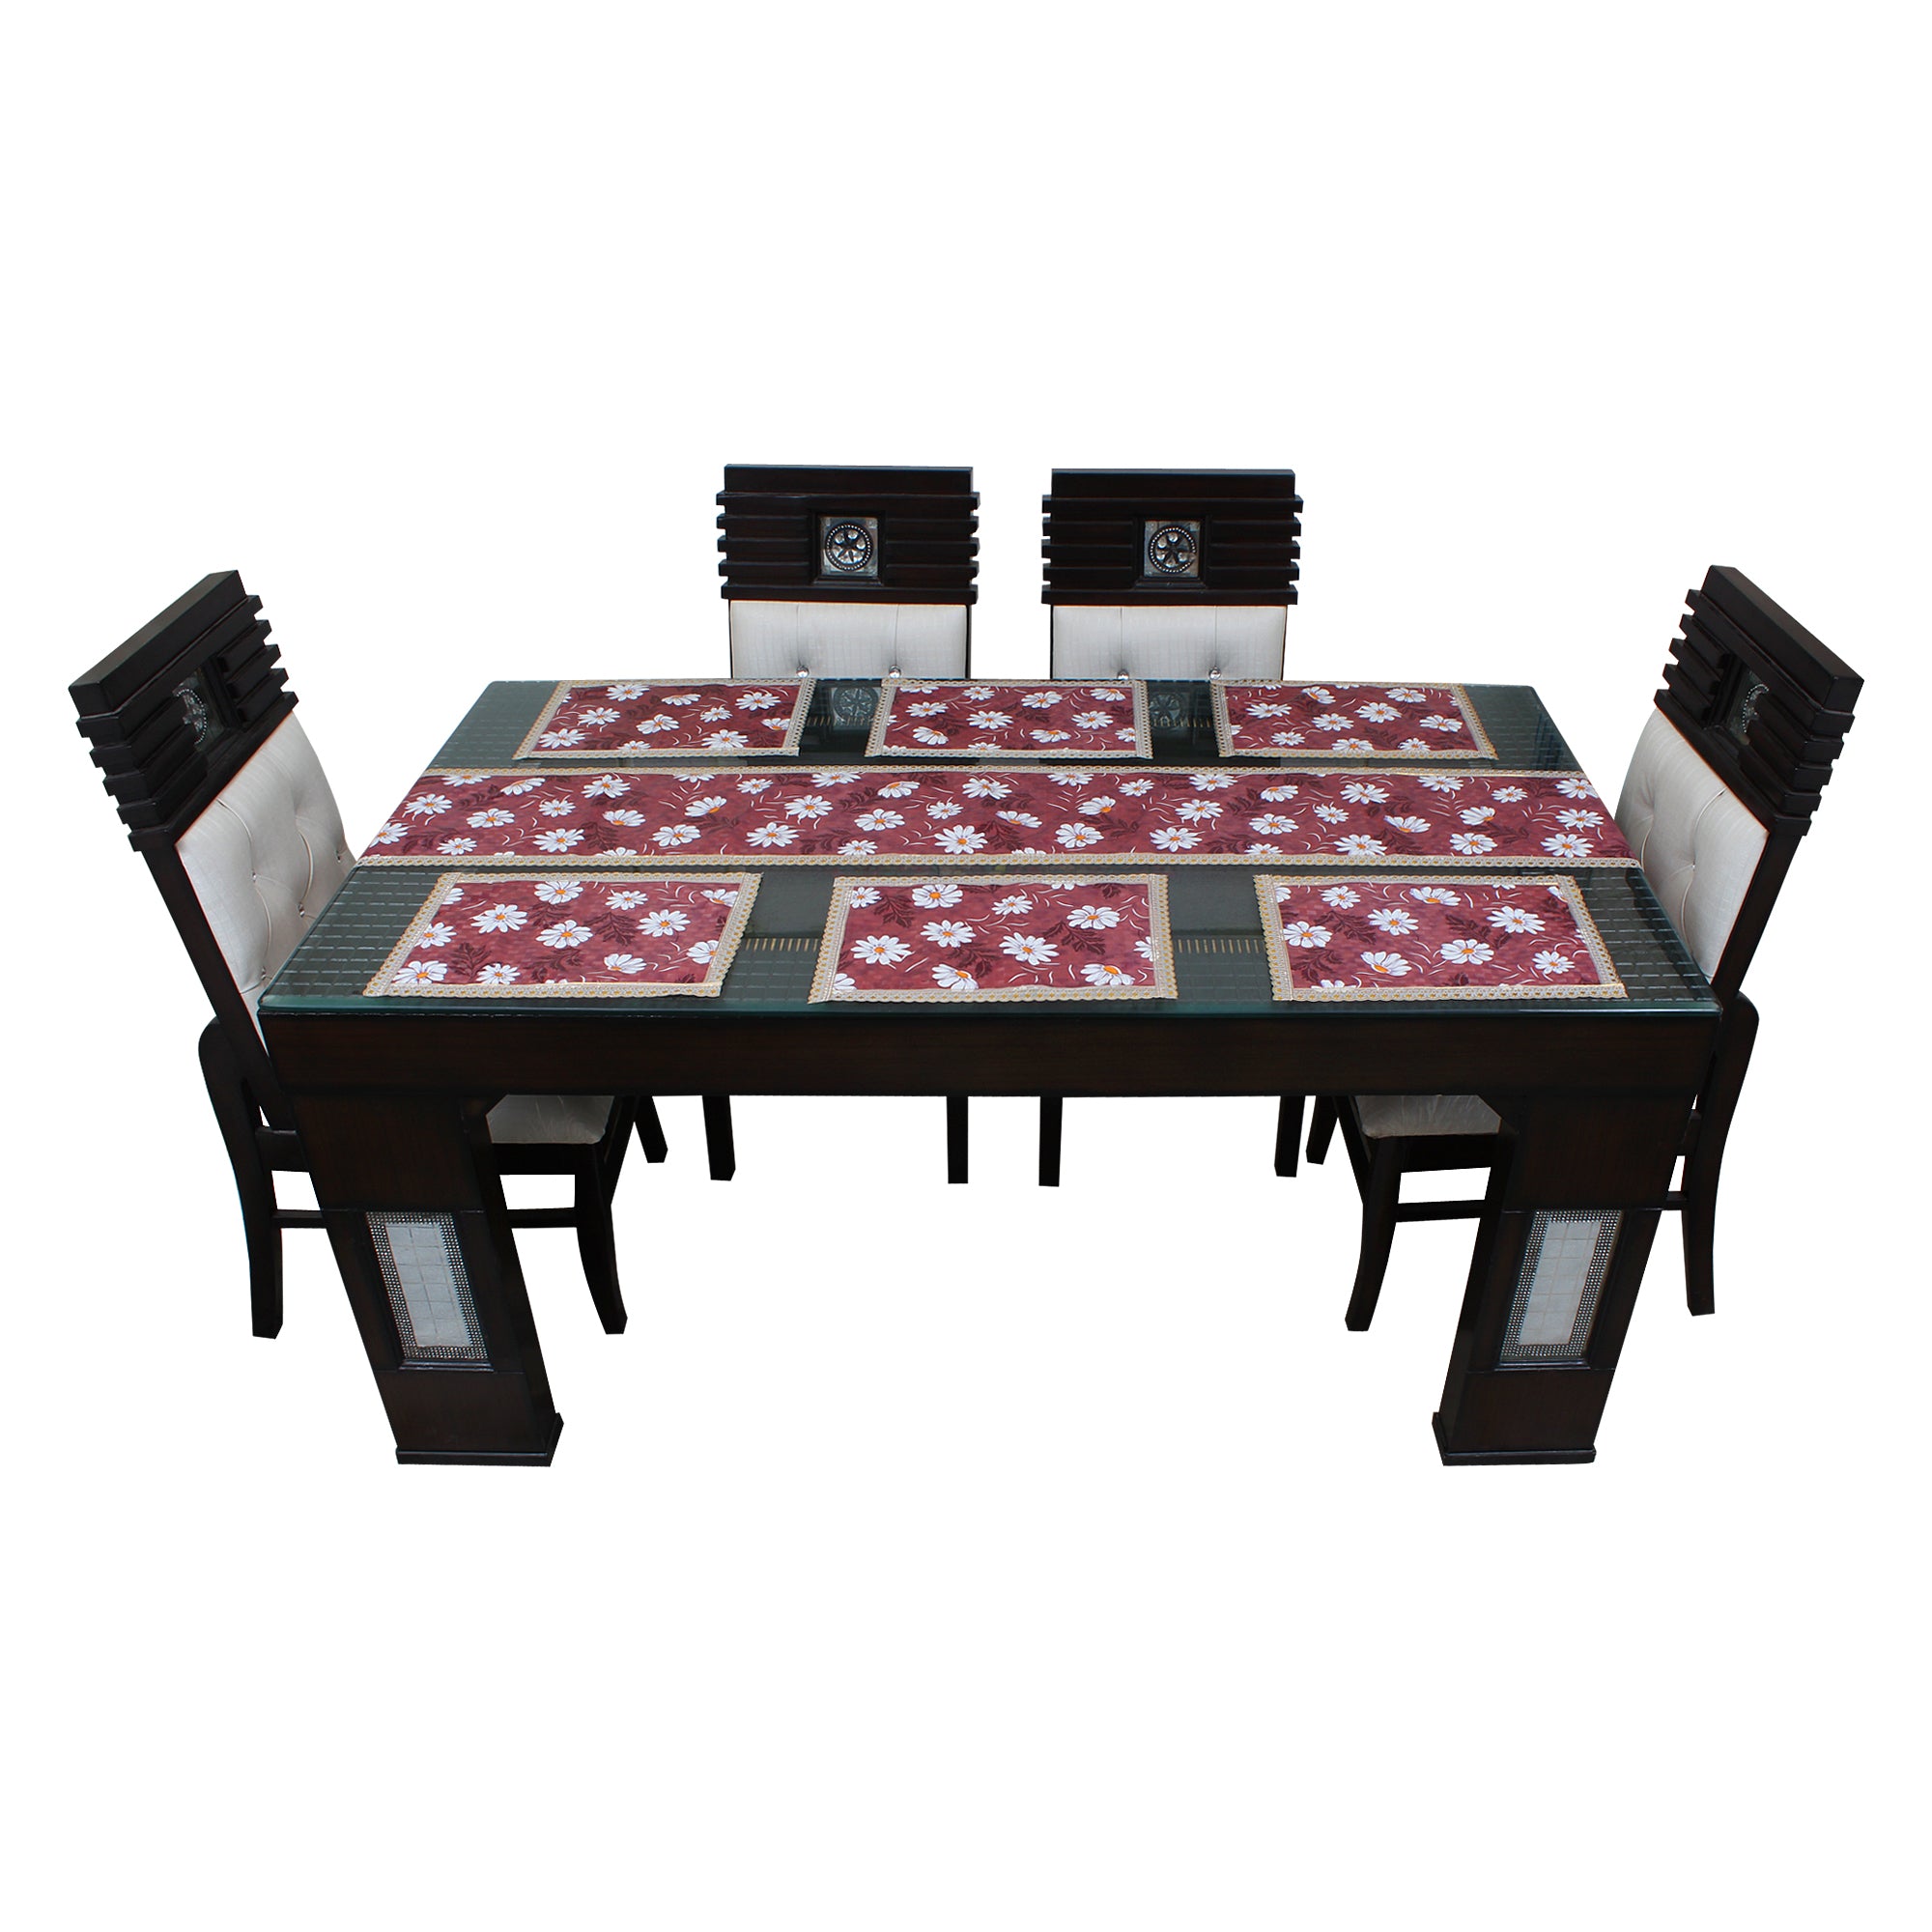 Waterproof & Dustproof Dining Table Runner With 6 Placemats, SA08 - Dream Care Furnishings Private Limited